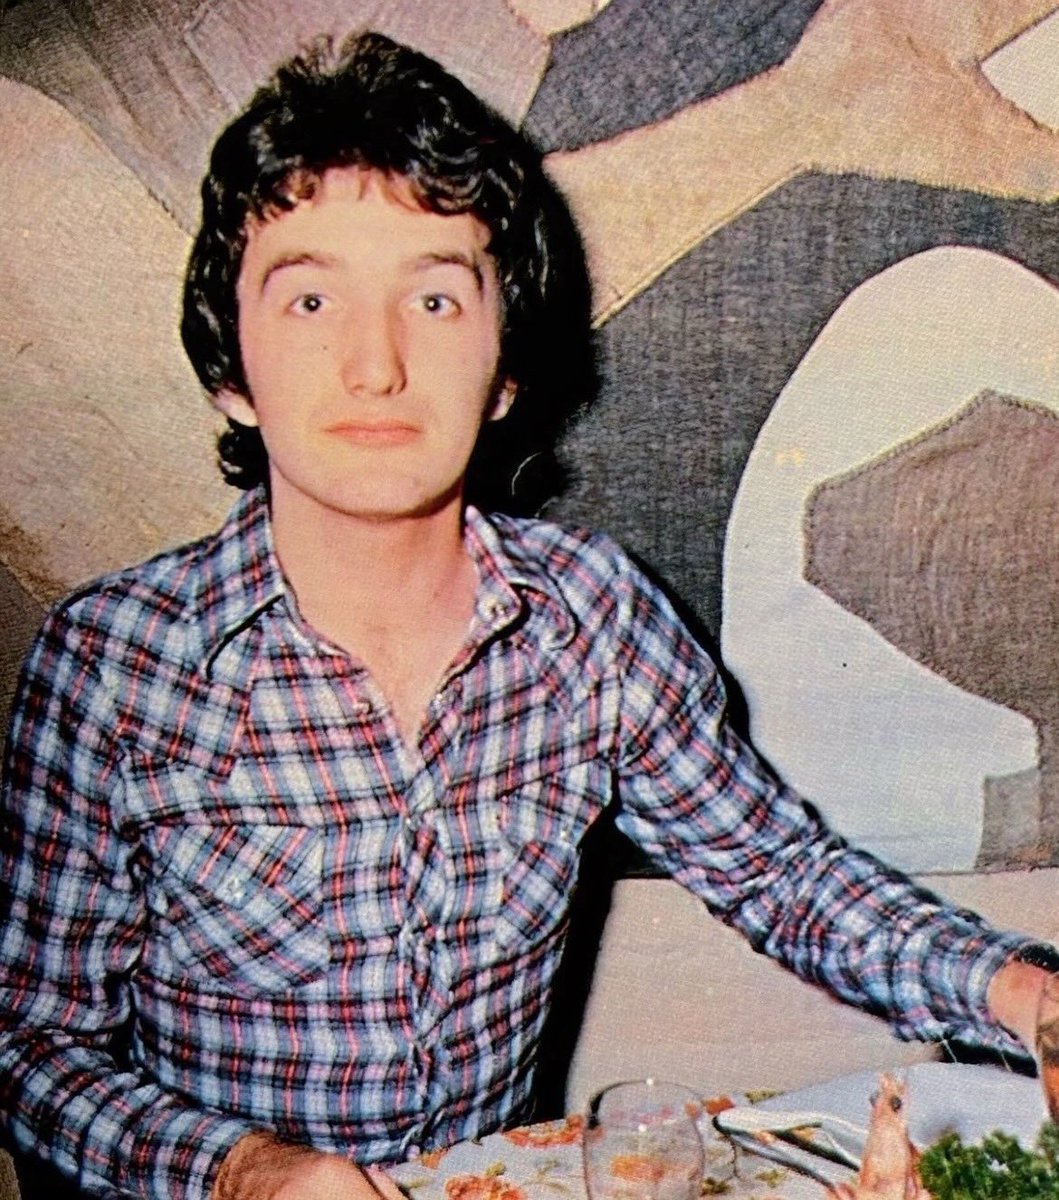 New to meee ❤️ #JohnDeacon